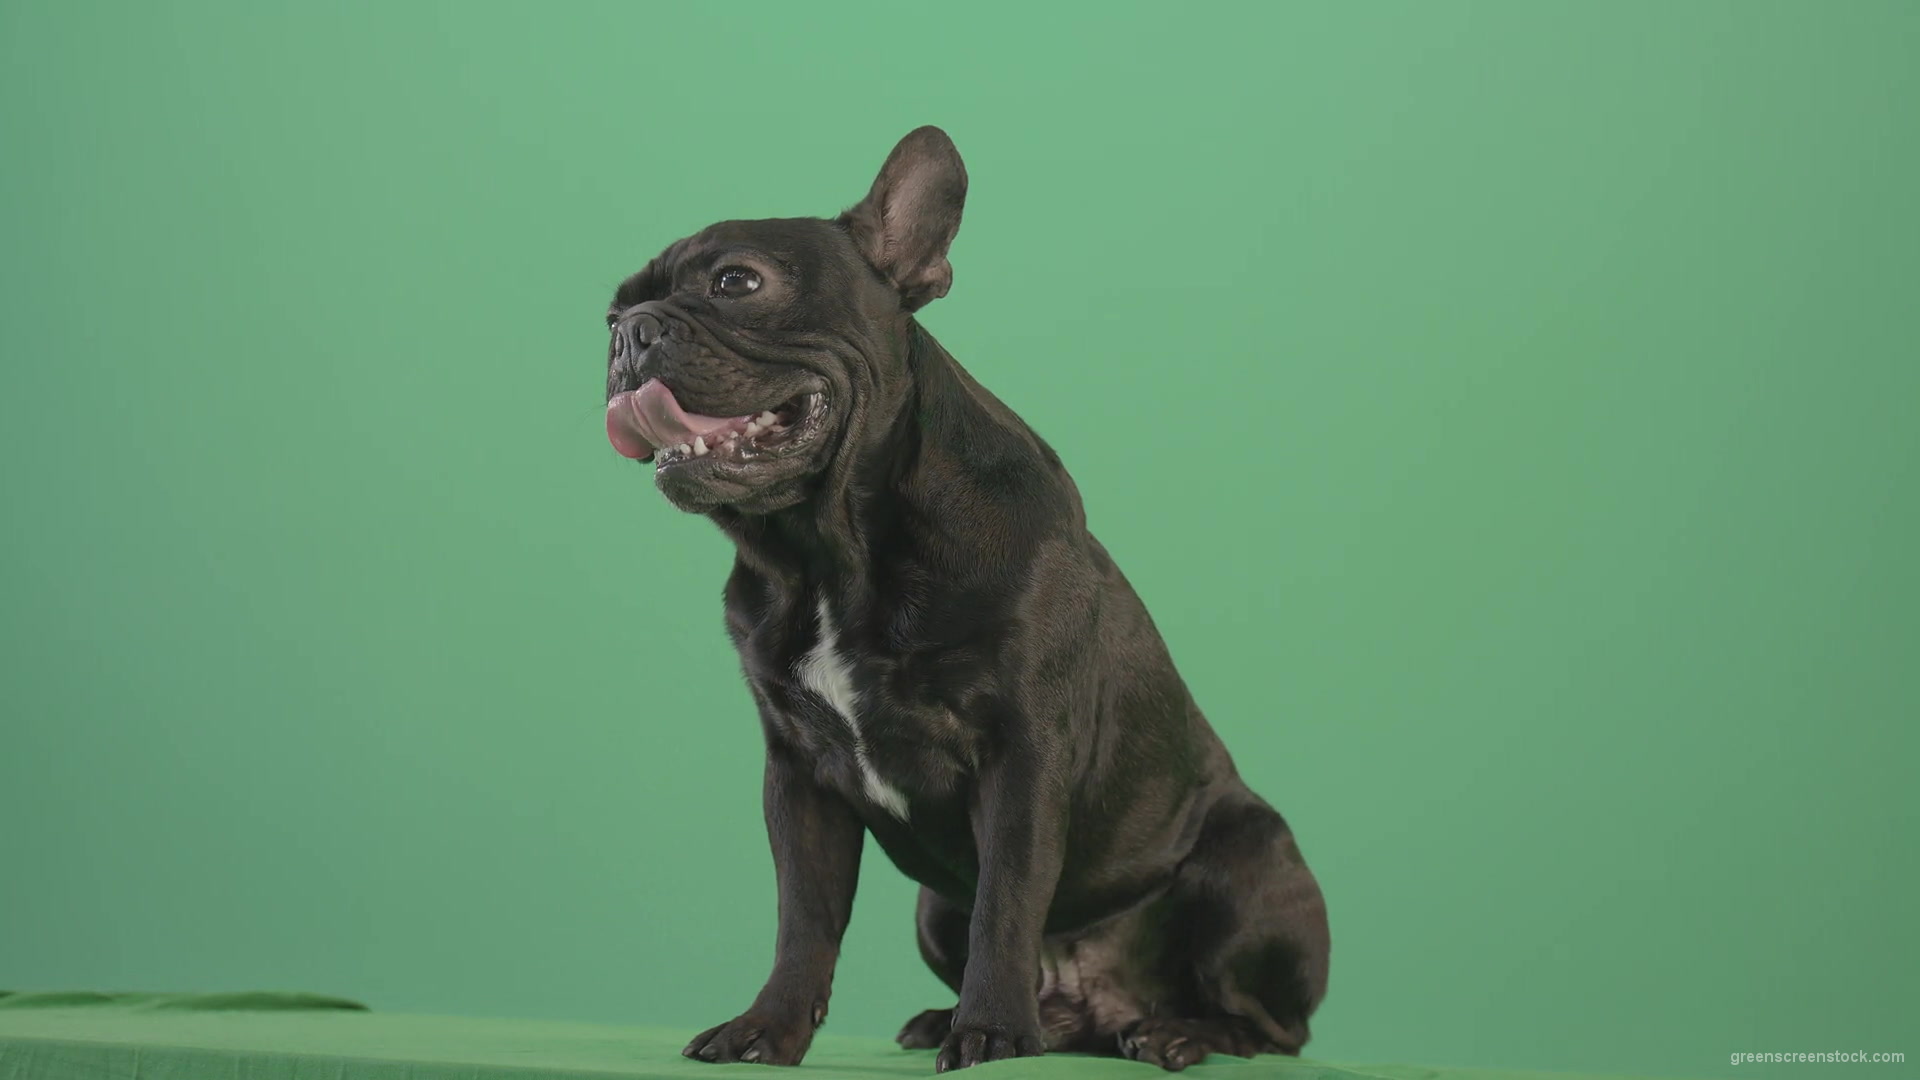 Angra-French-bulldog-black-toy-dog-watch-enemy-over-green-screen-4K-Video-Footage-1920_002 Green Screen Stock